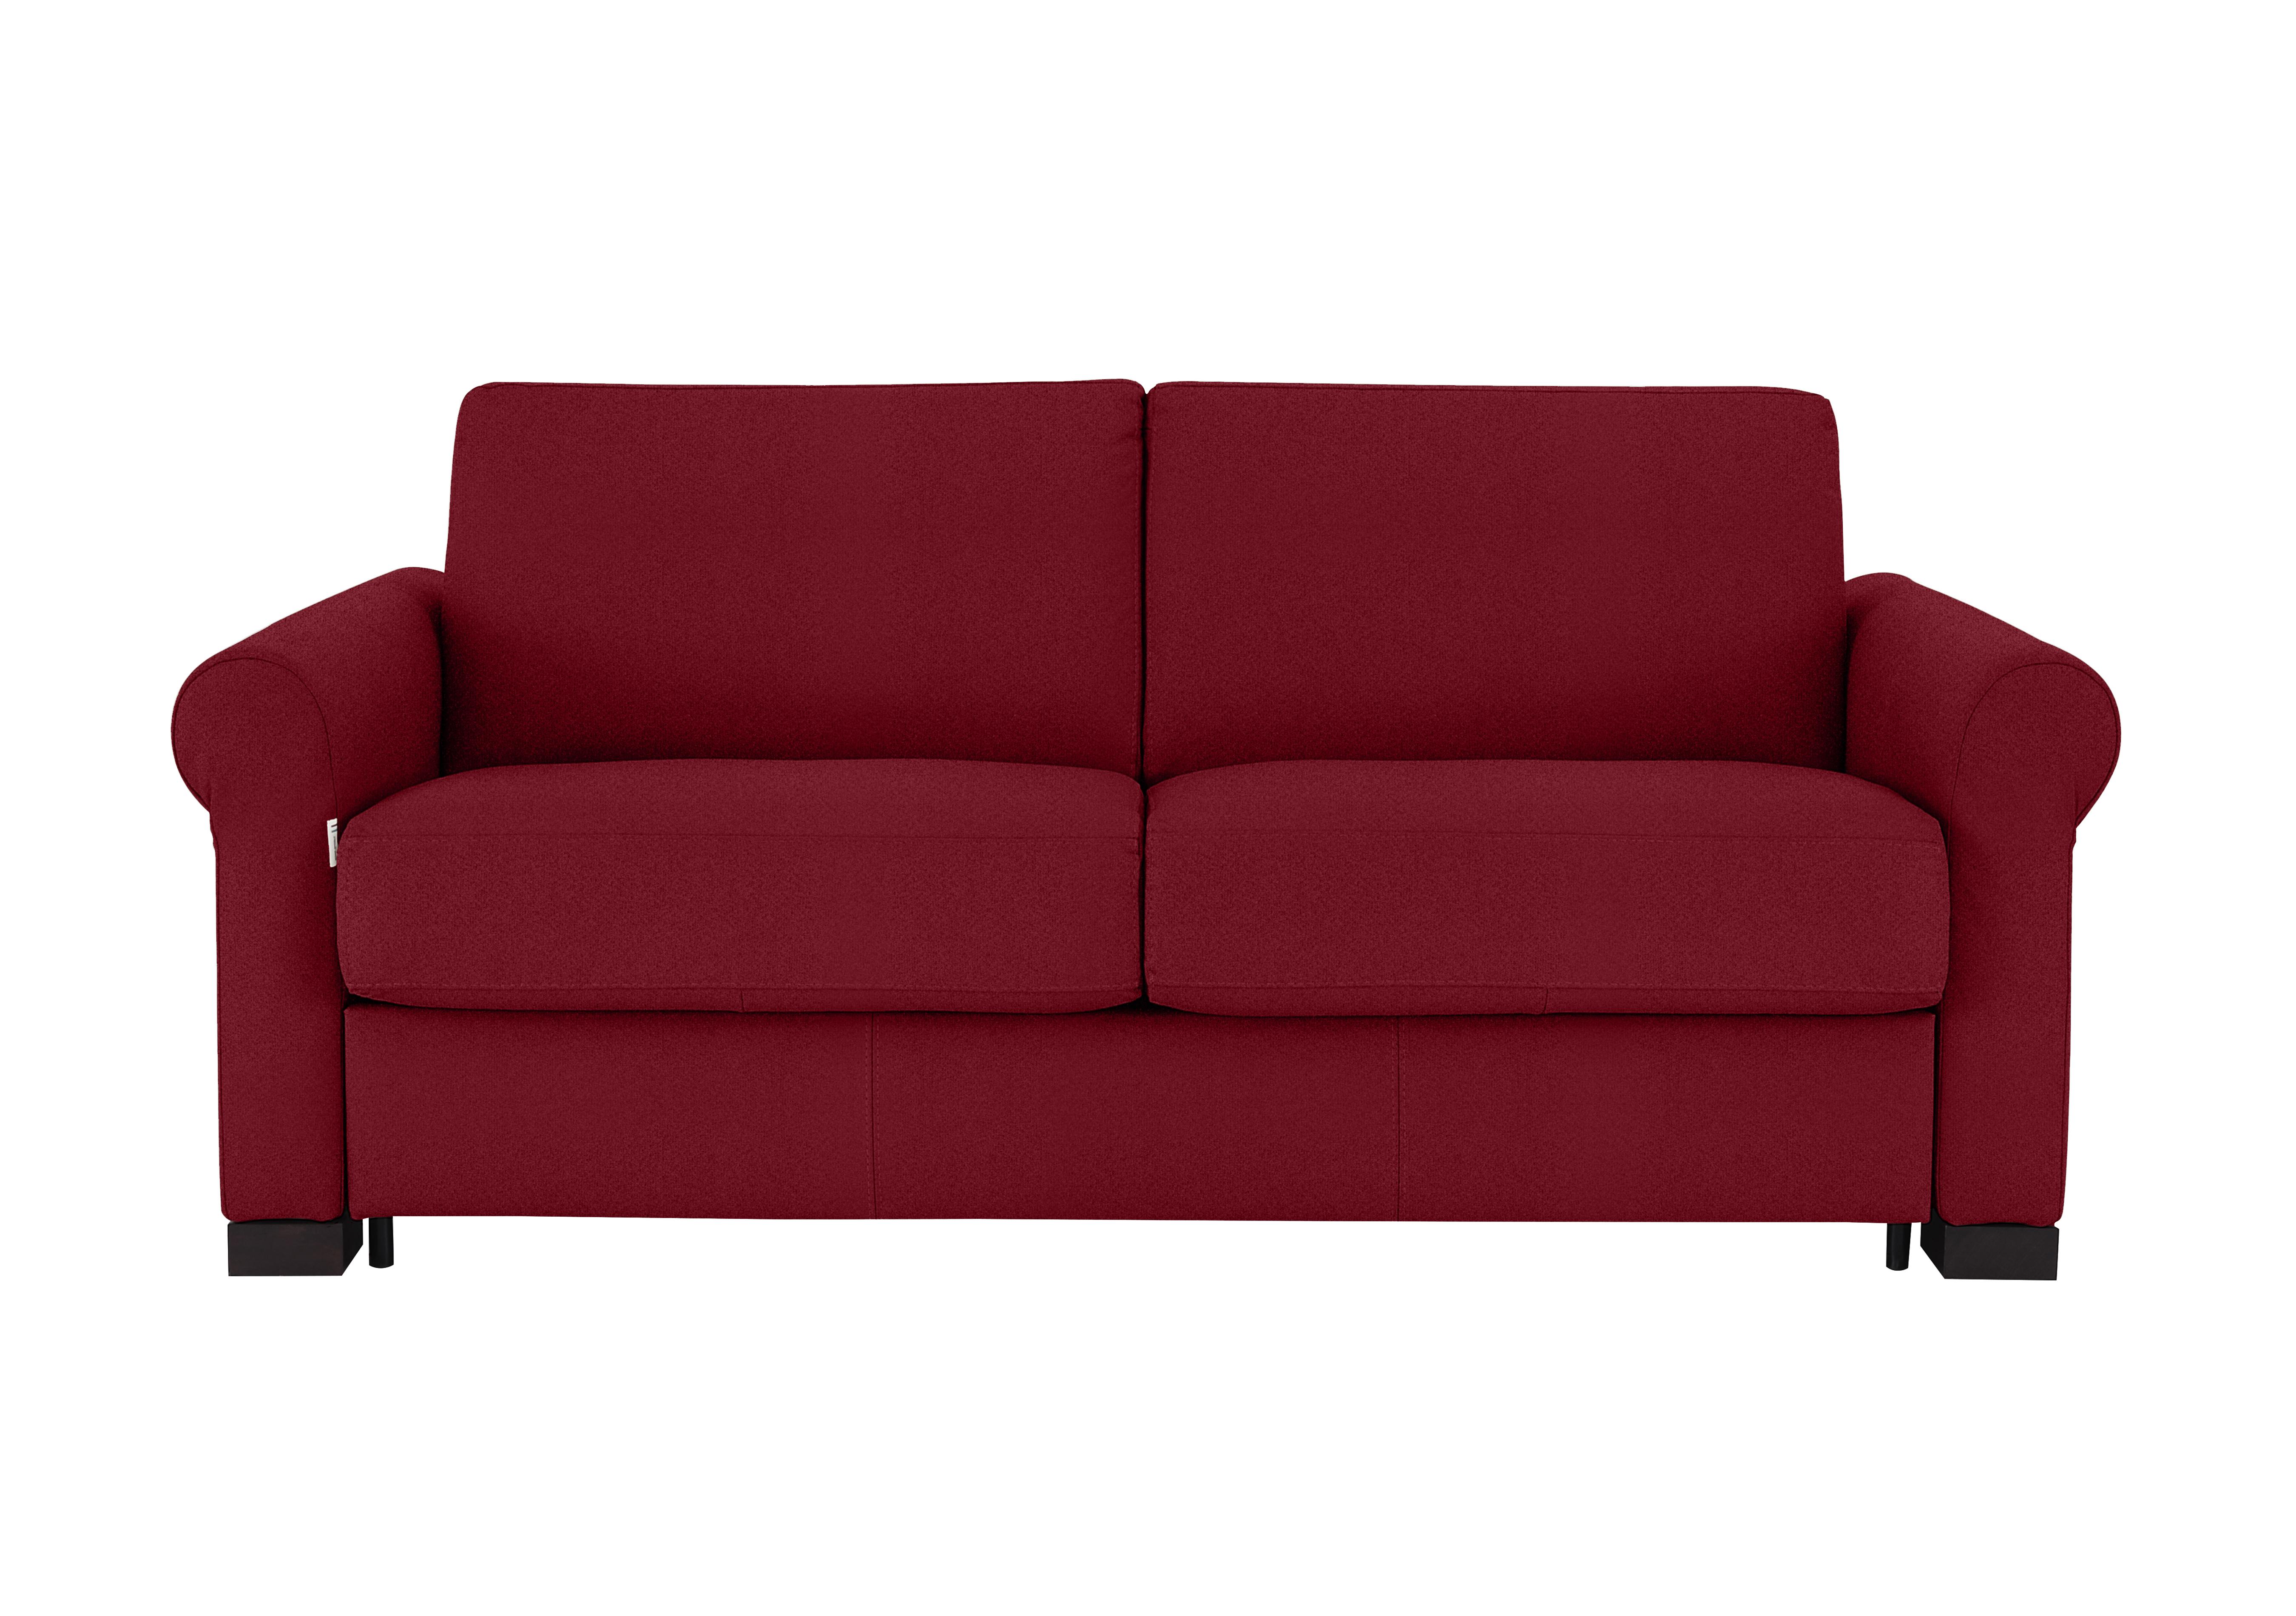 Alcova 2.5 Seater Fabric Sofa Bed with Scroll Arms in Coupe Rosso 305 on Furniture Village